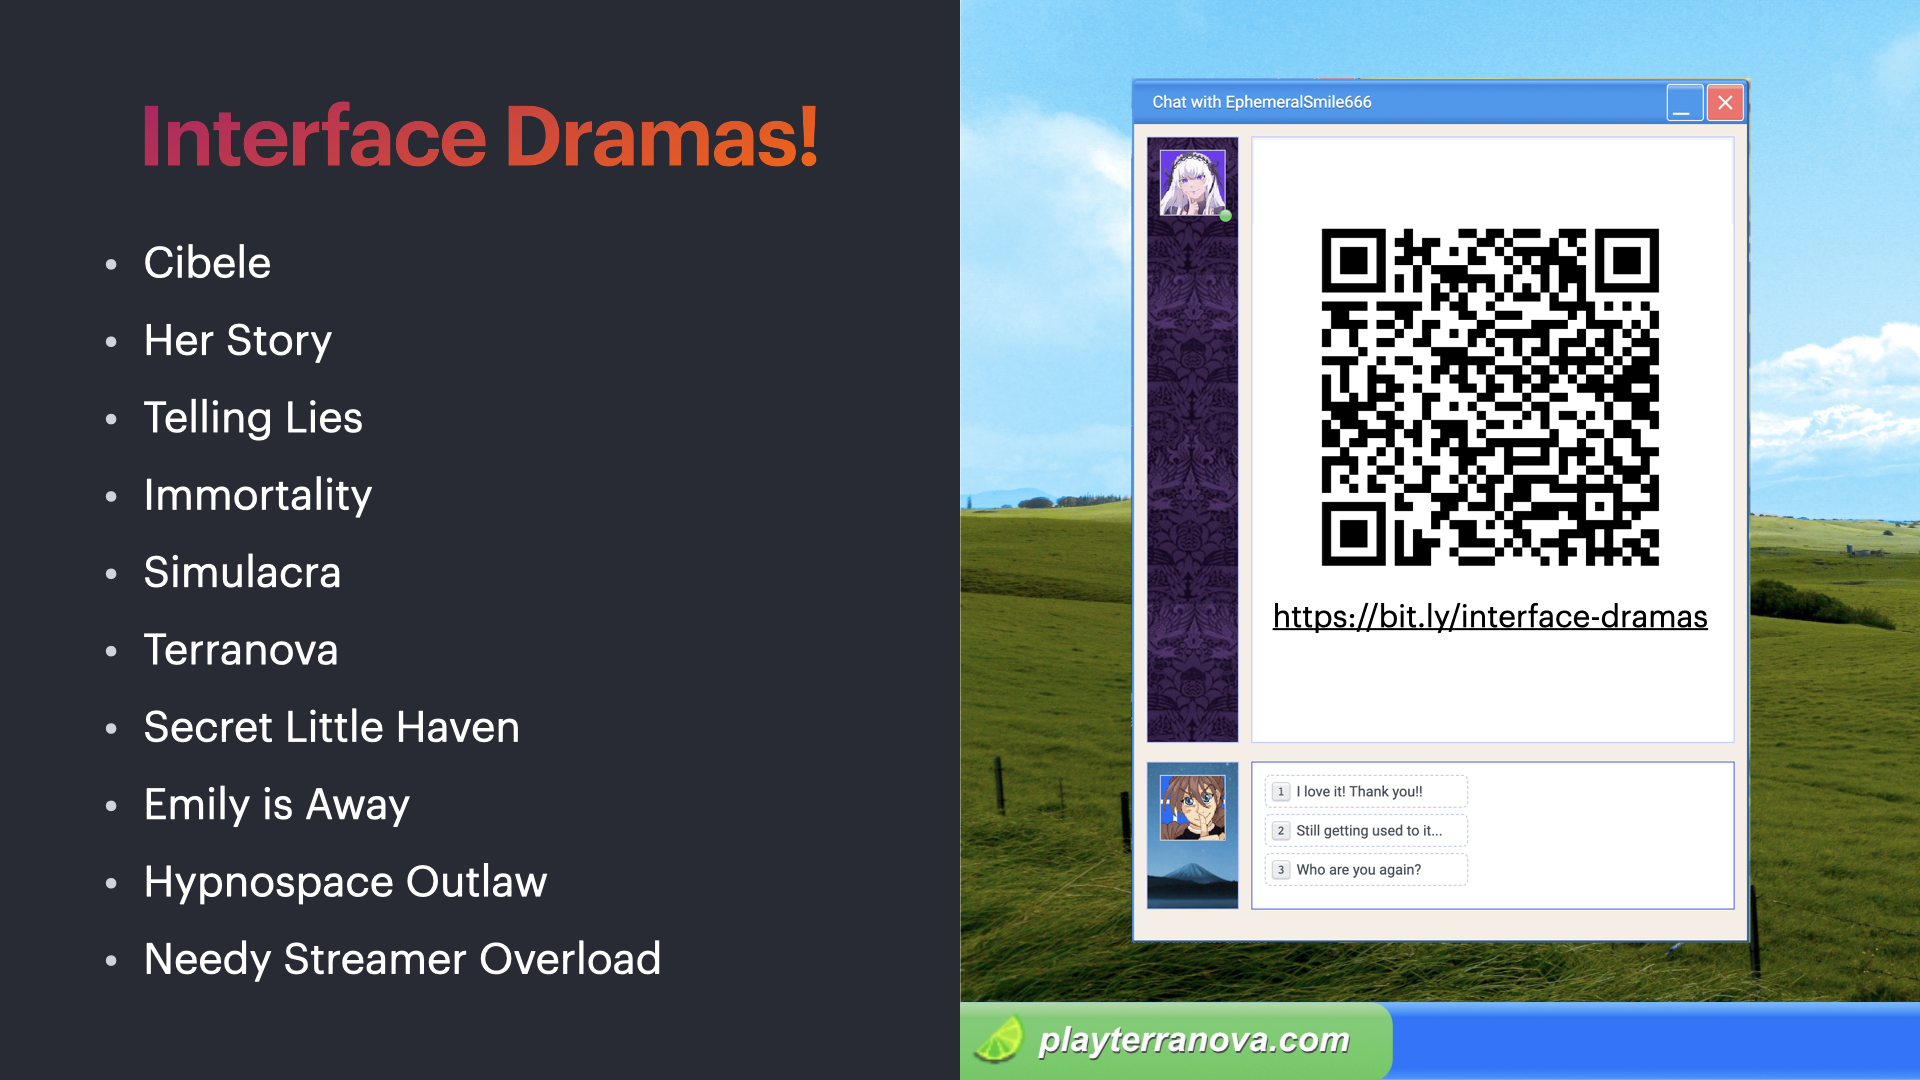 A list of interface dramas. Check out the link above to see the full list!